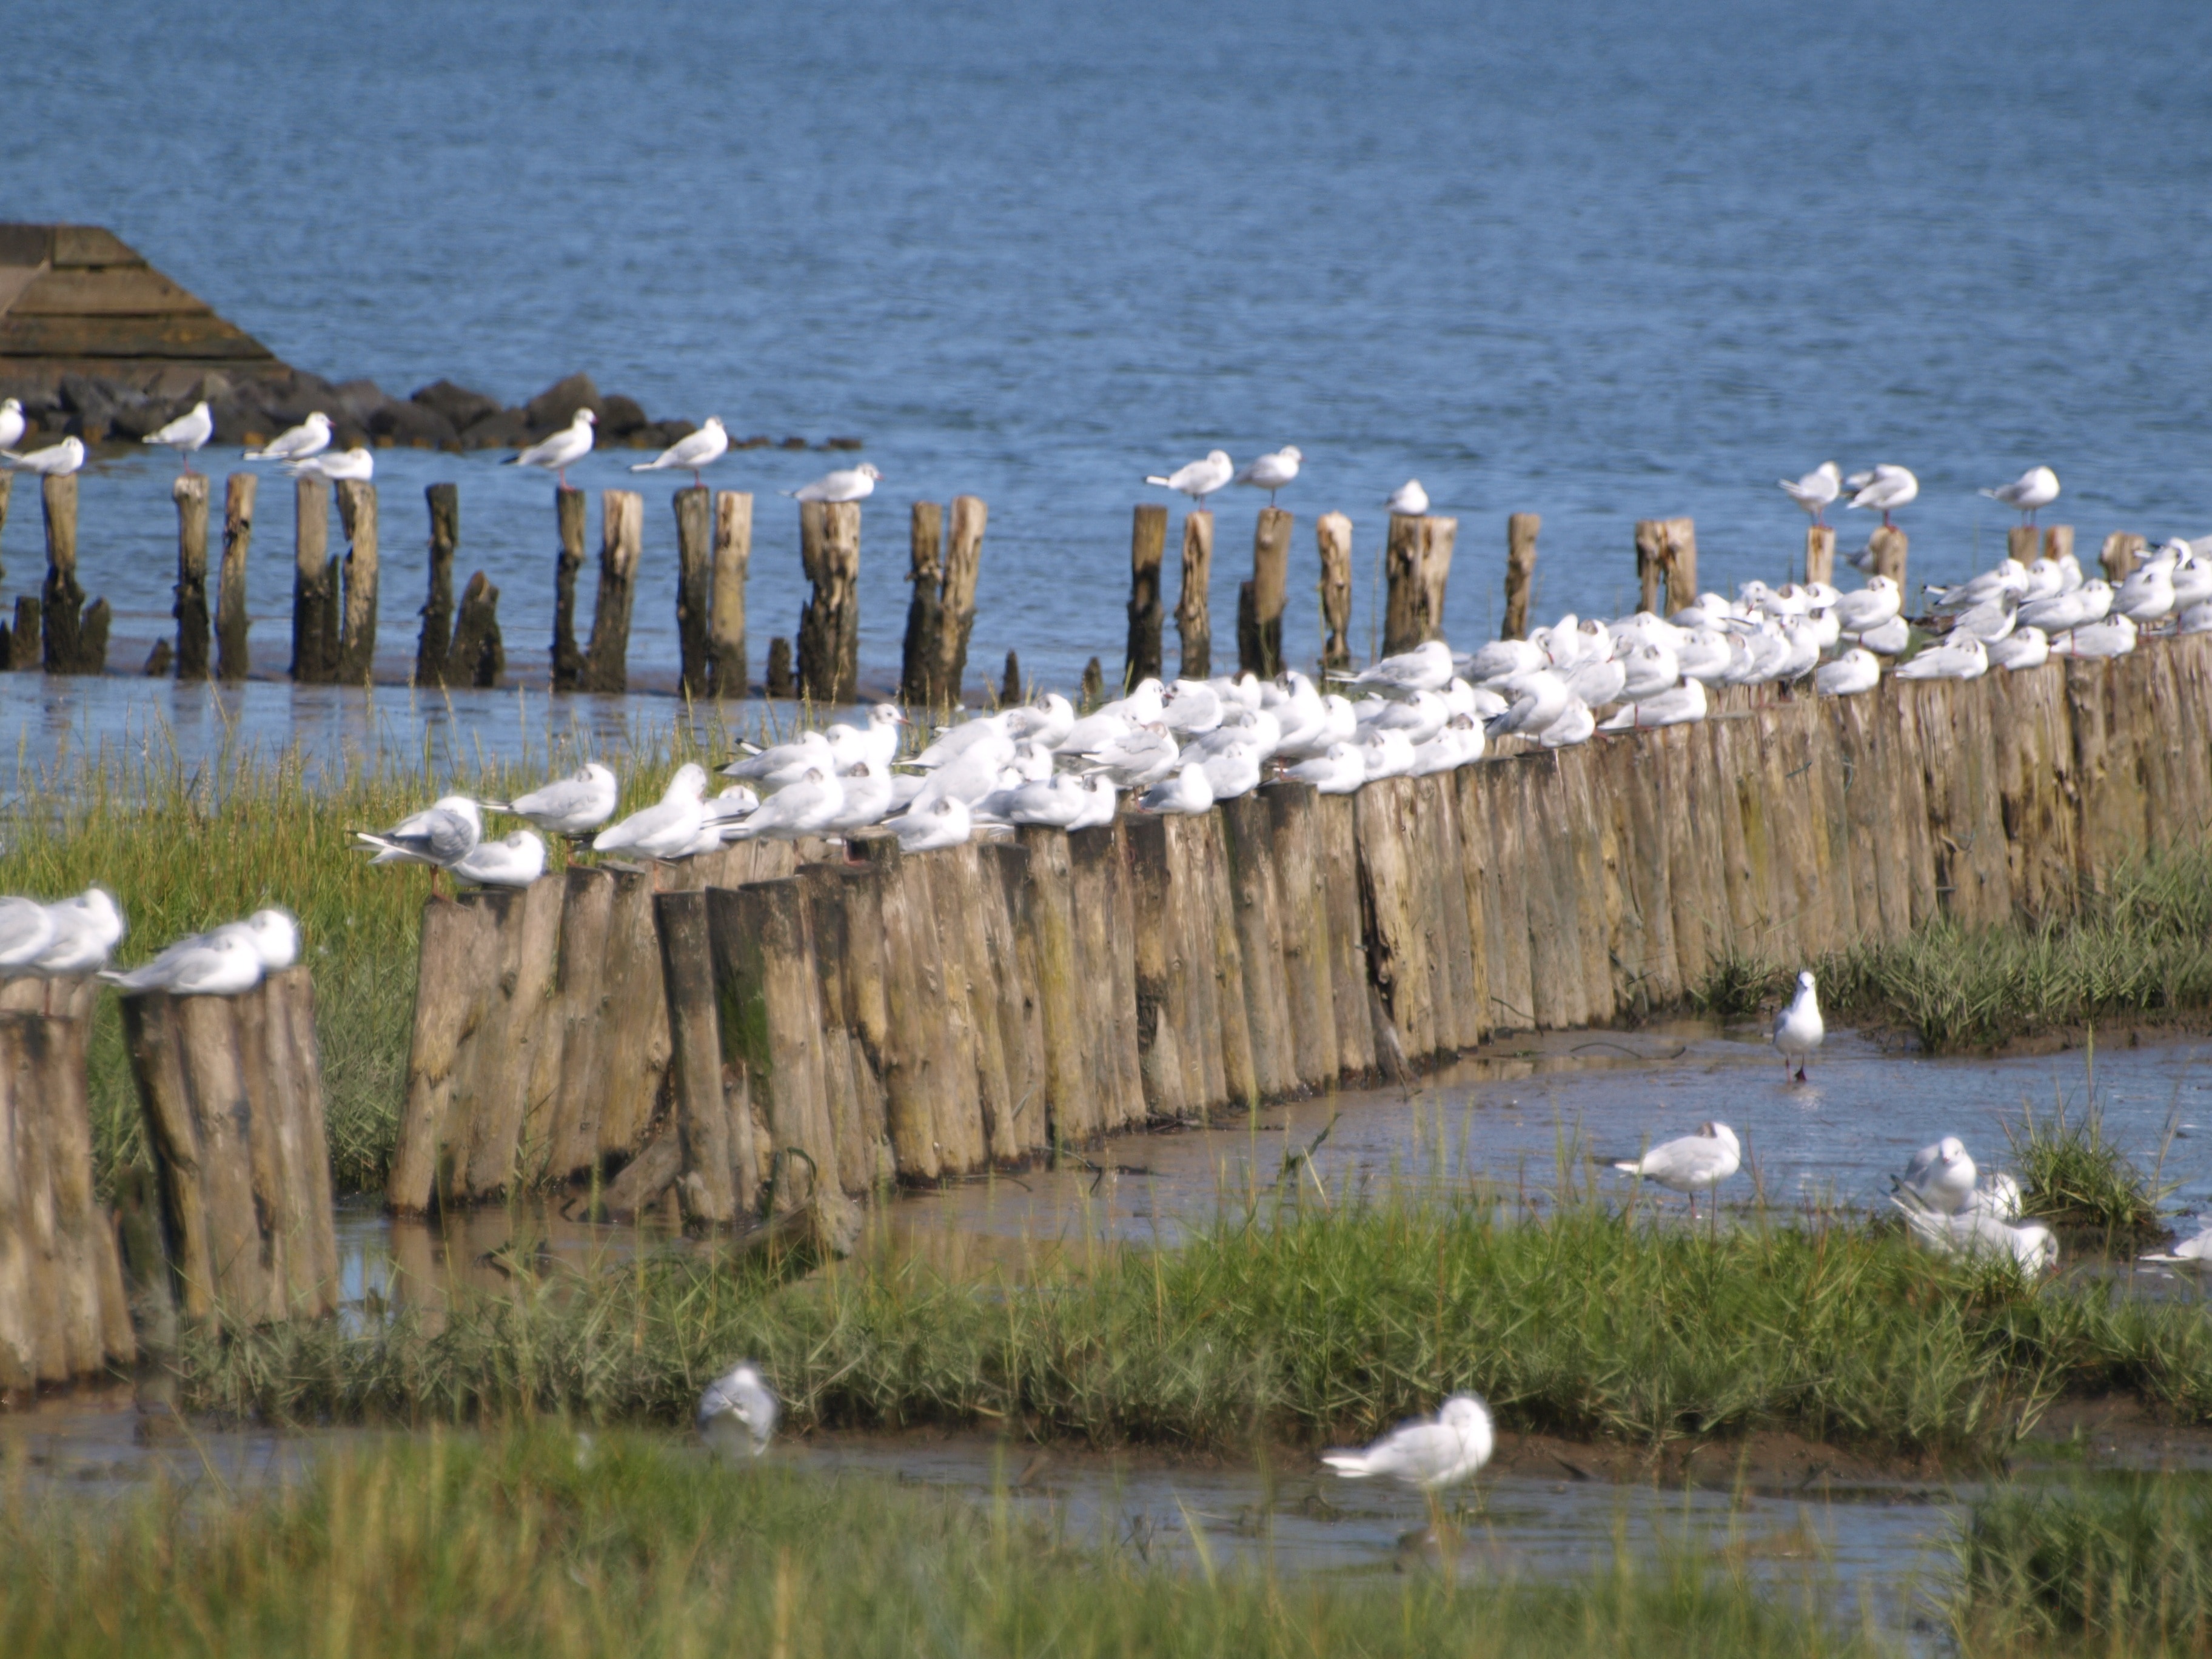 flock of white birds perched on brown wooden beach fence